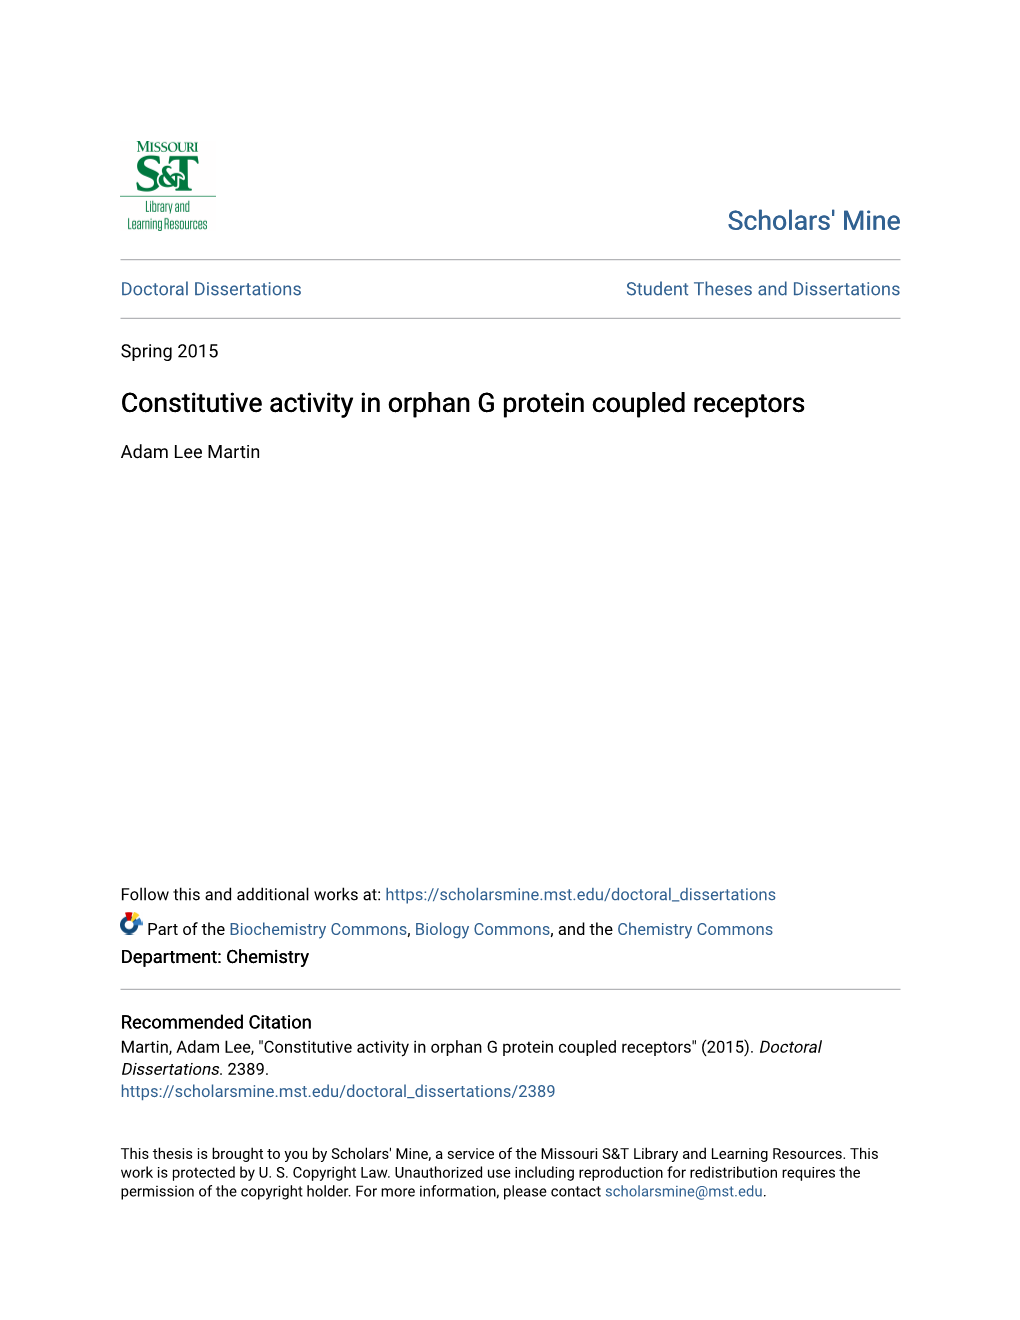 Constitutive Activity in Orphan G Protein Coupled Receptors